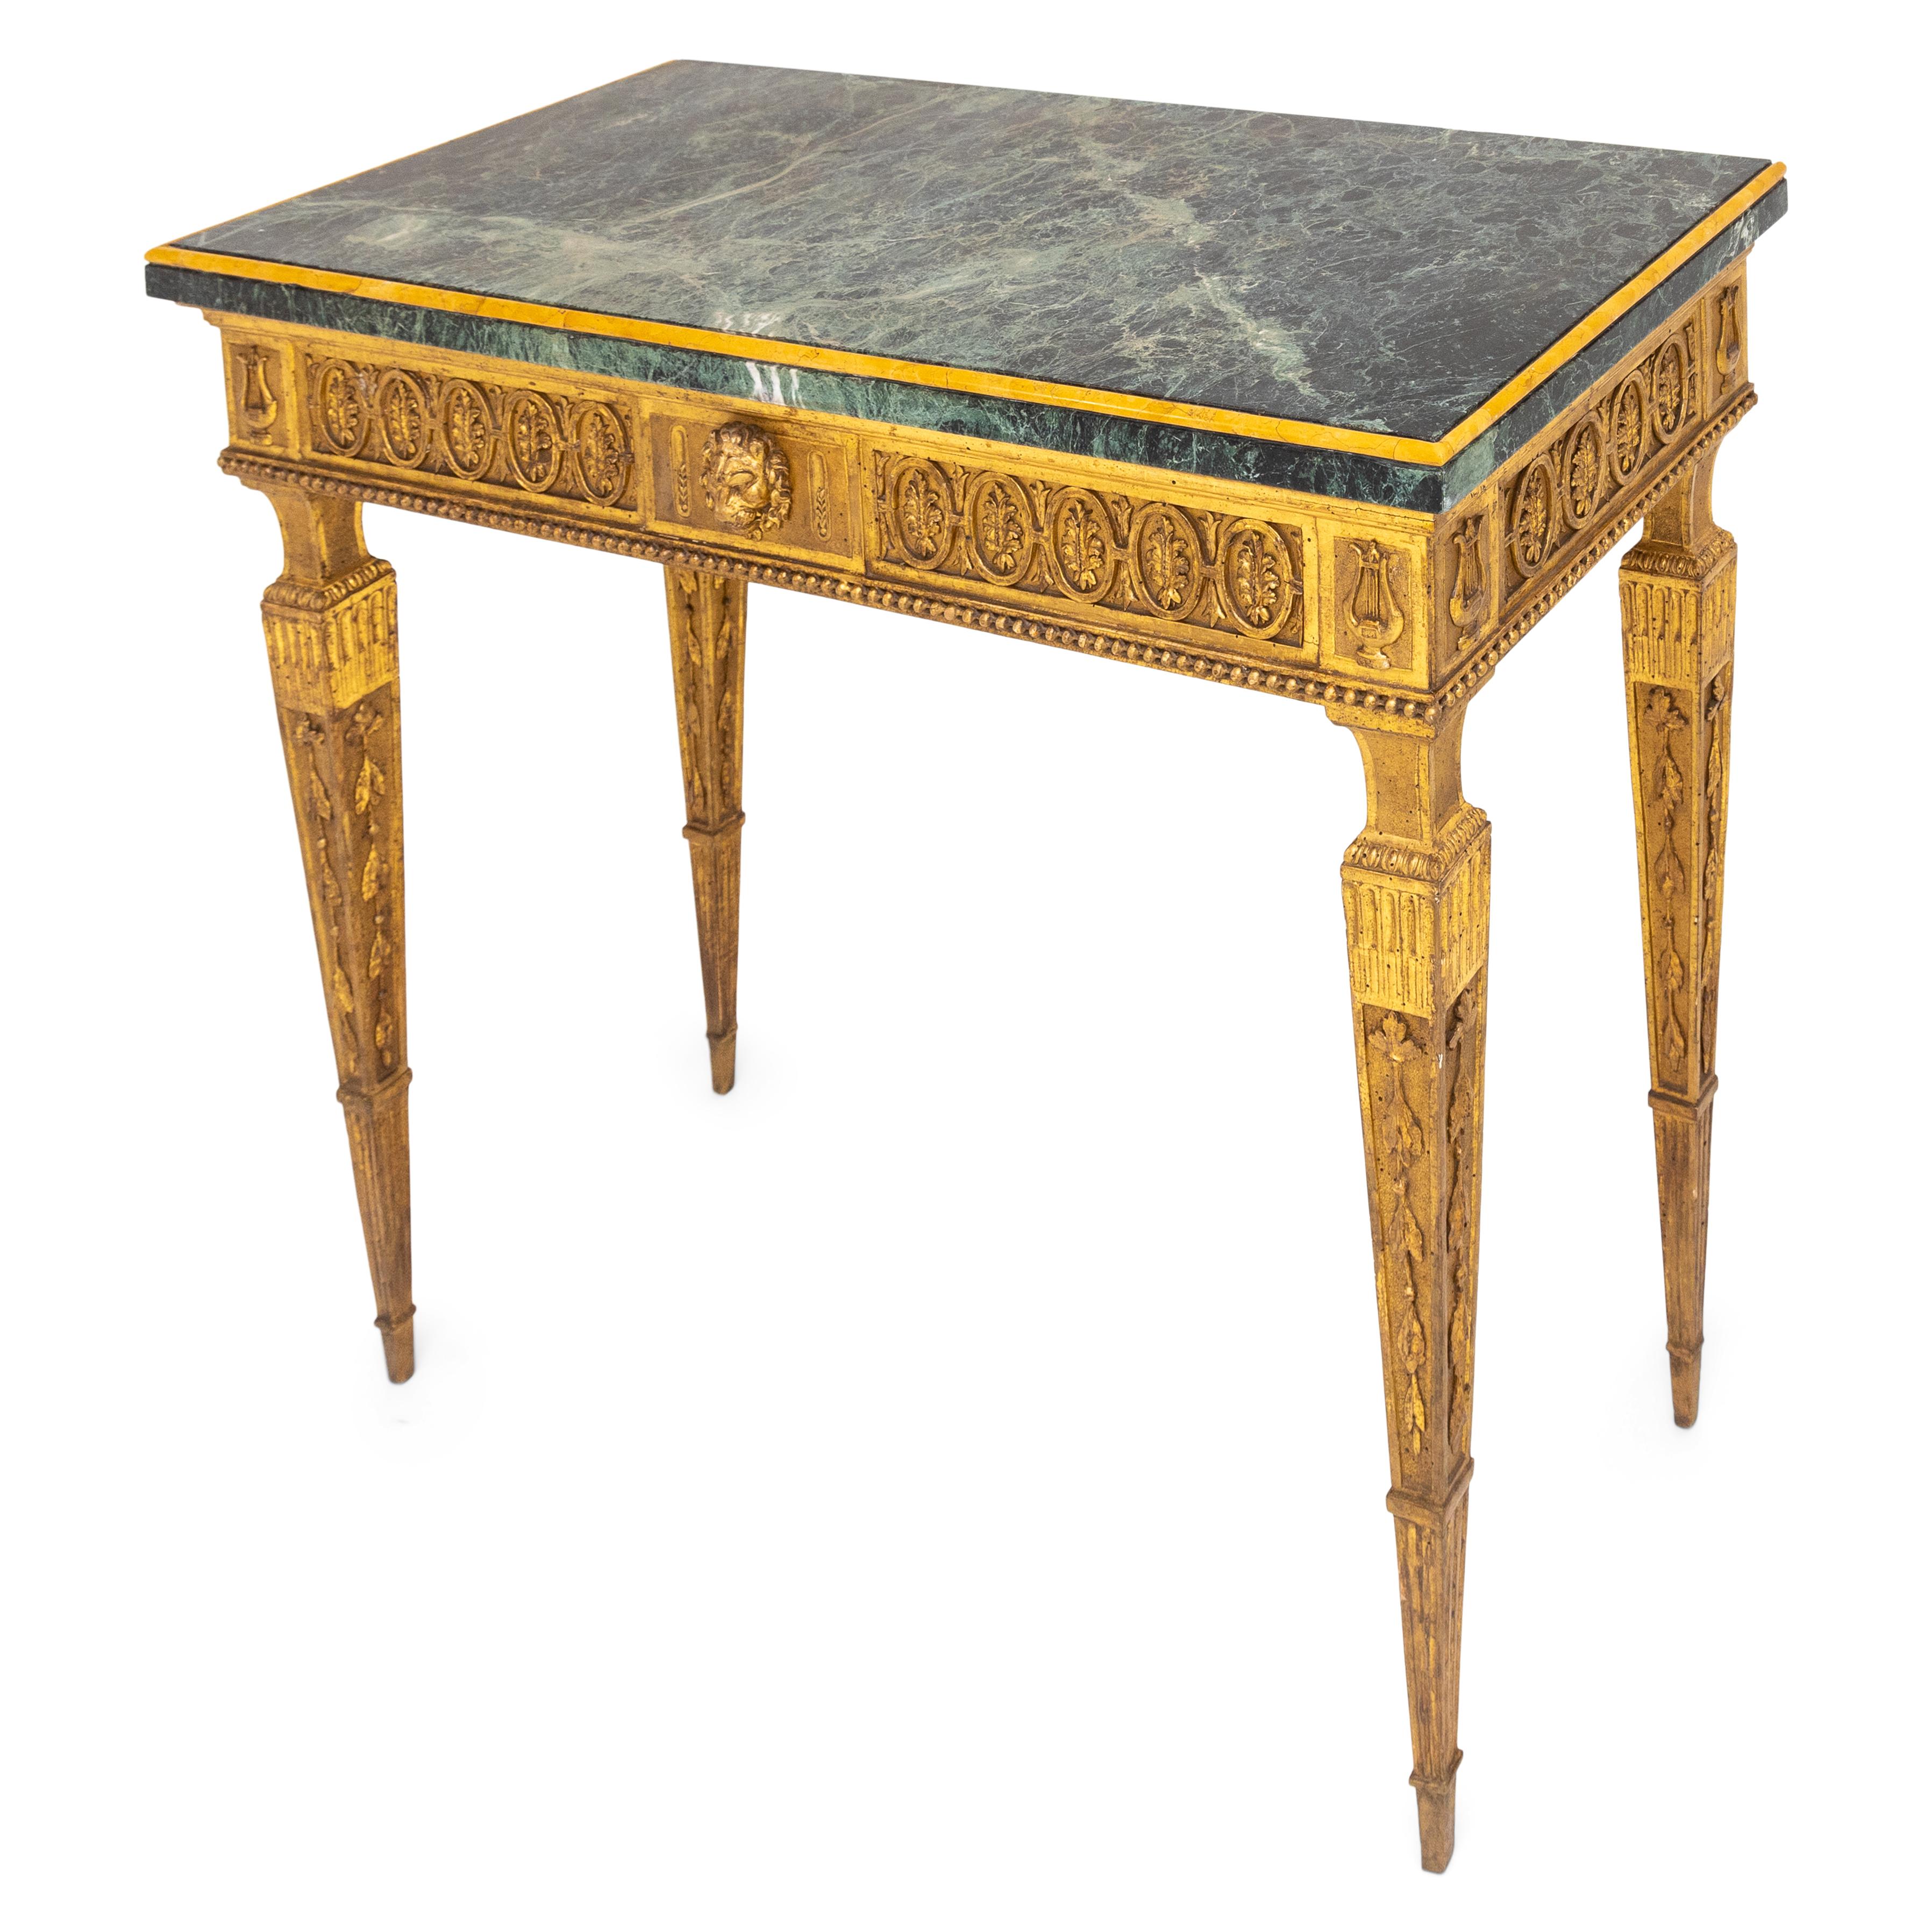 Gold-patinated Classicist console with a straight frame with pearl, lyre and acanthus leaf decoration in medallions and a central lion's head motif; standing on carved square-pointed feet with fluting and vine decoration. The green-veined marble